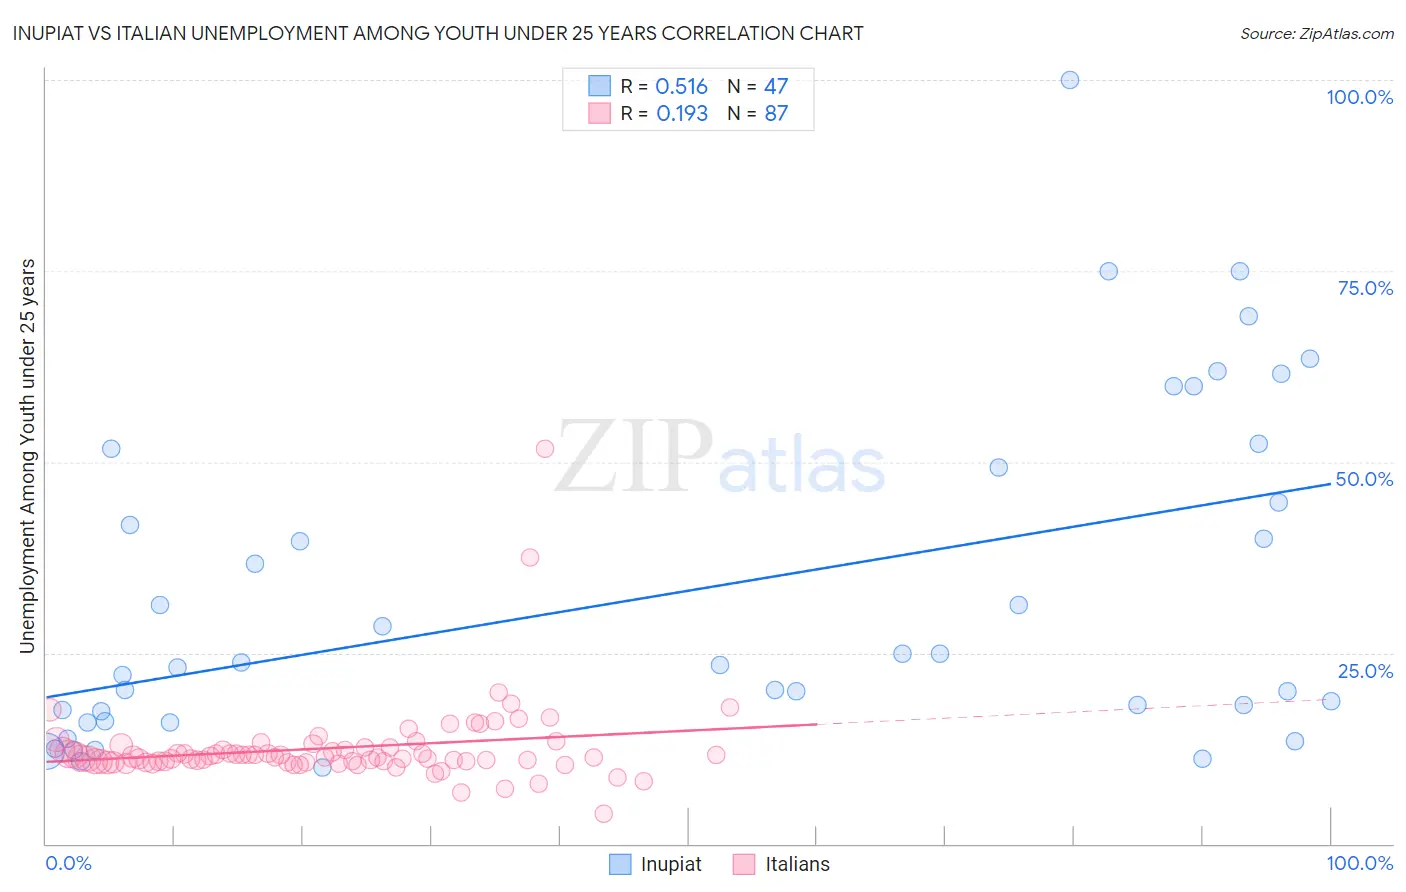 Inupiat vs Italian Unemployment Among Youth under 25 years